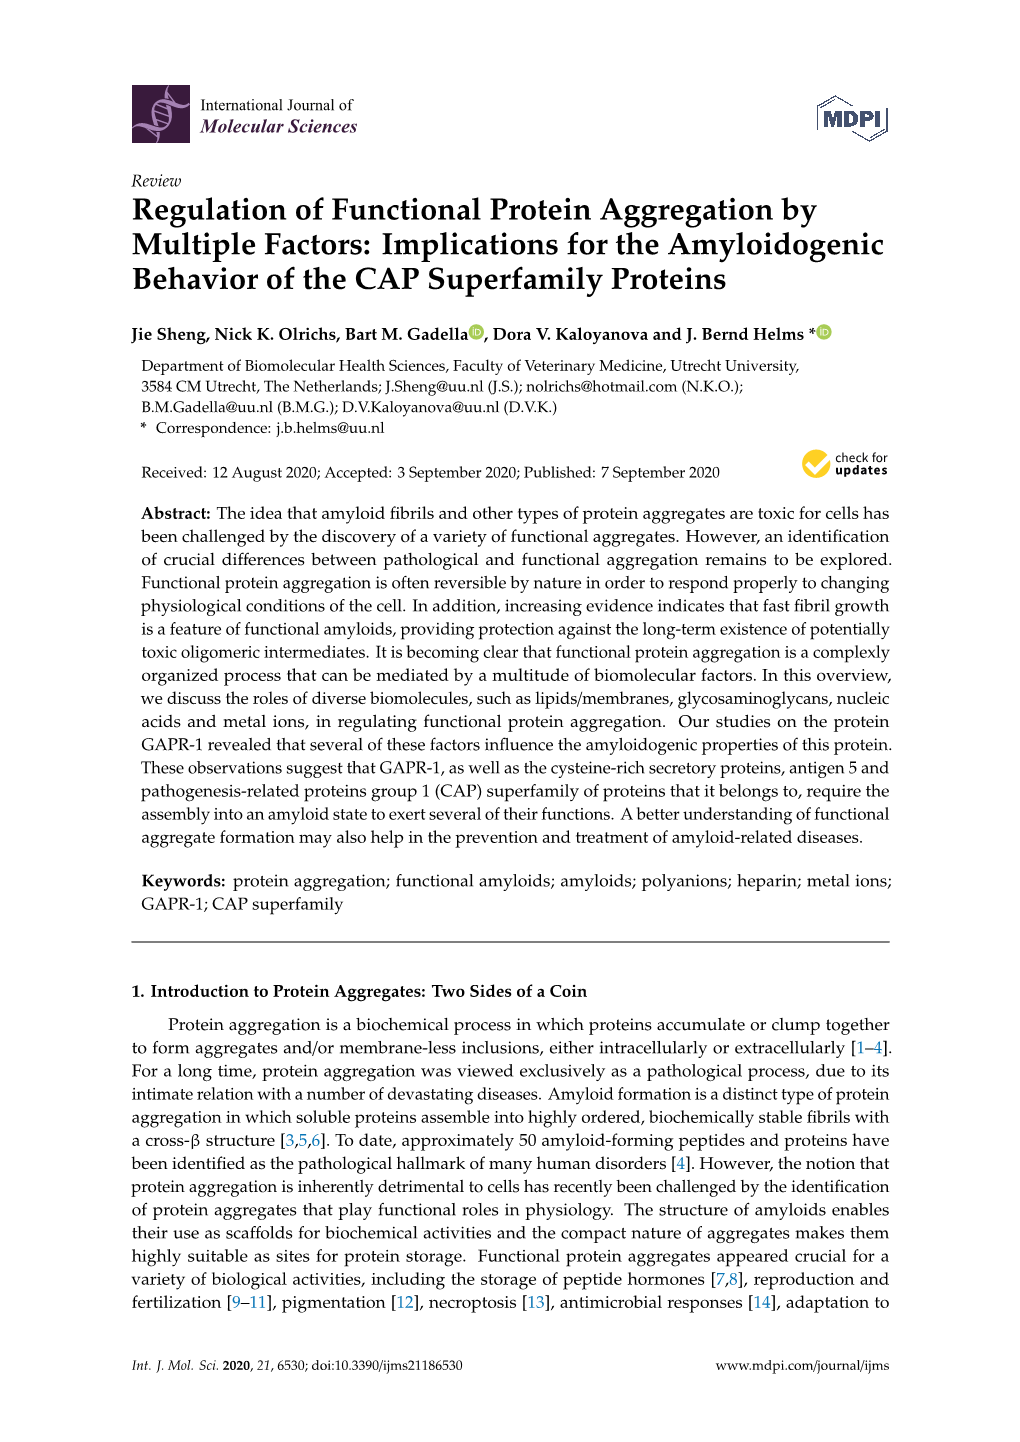 Regulation of Functional Protein Aggregation by Multiple Factors: Implications for the Amyloidogenic Behavior of the CAP Superfamily Proteins